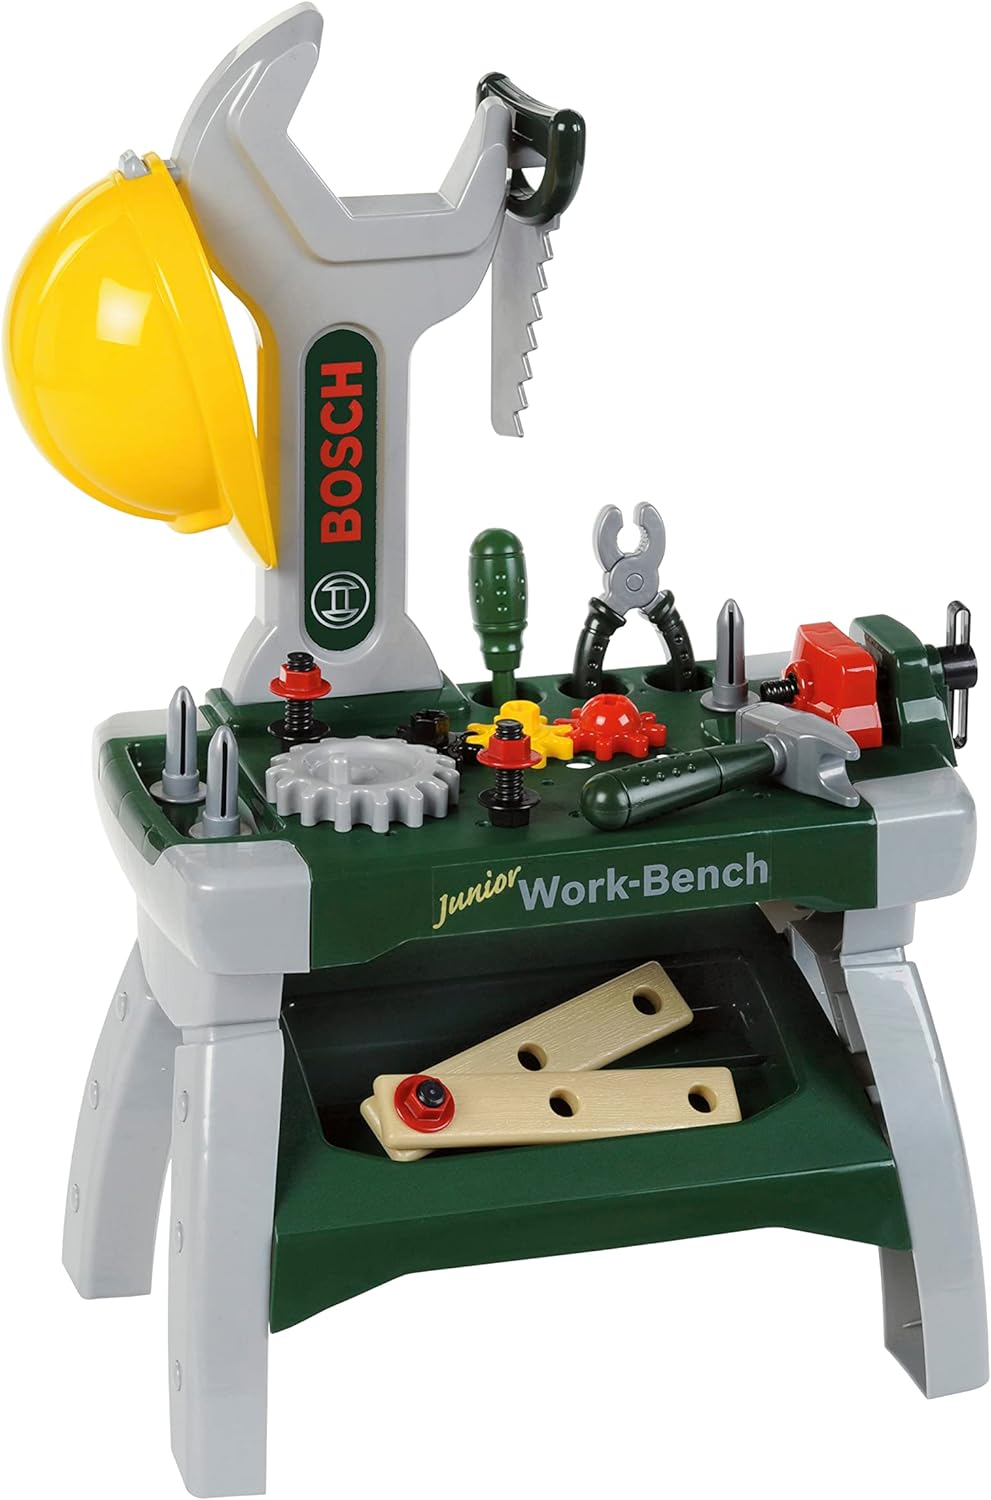 Bosch Toy Workbench Junior Playset with Tools For Kids